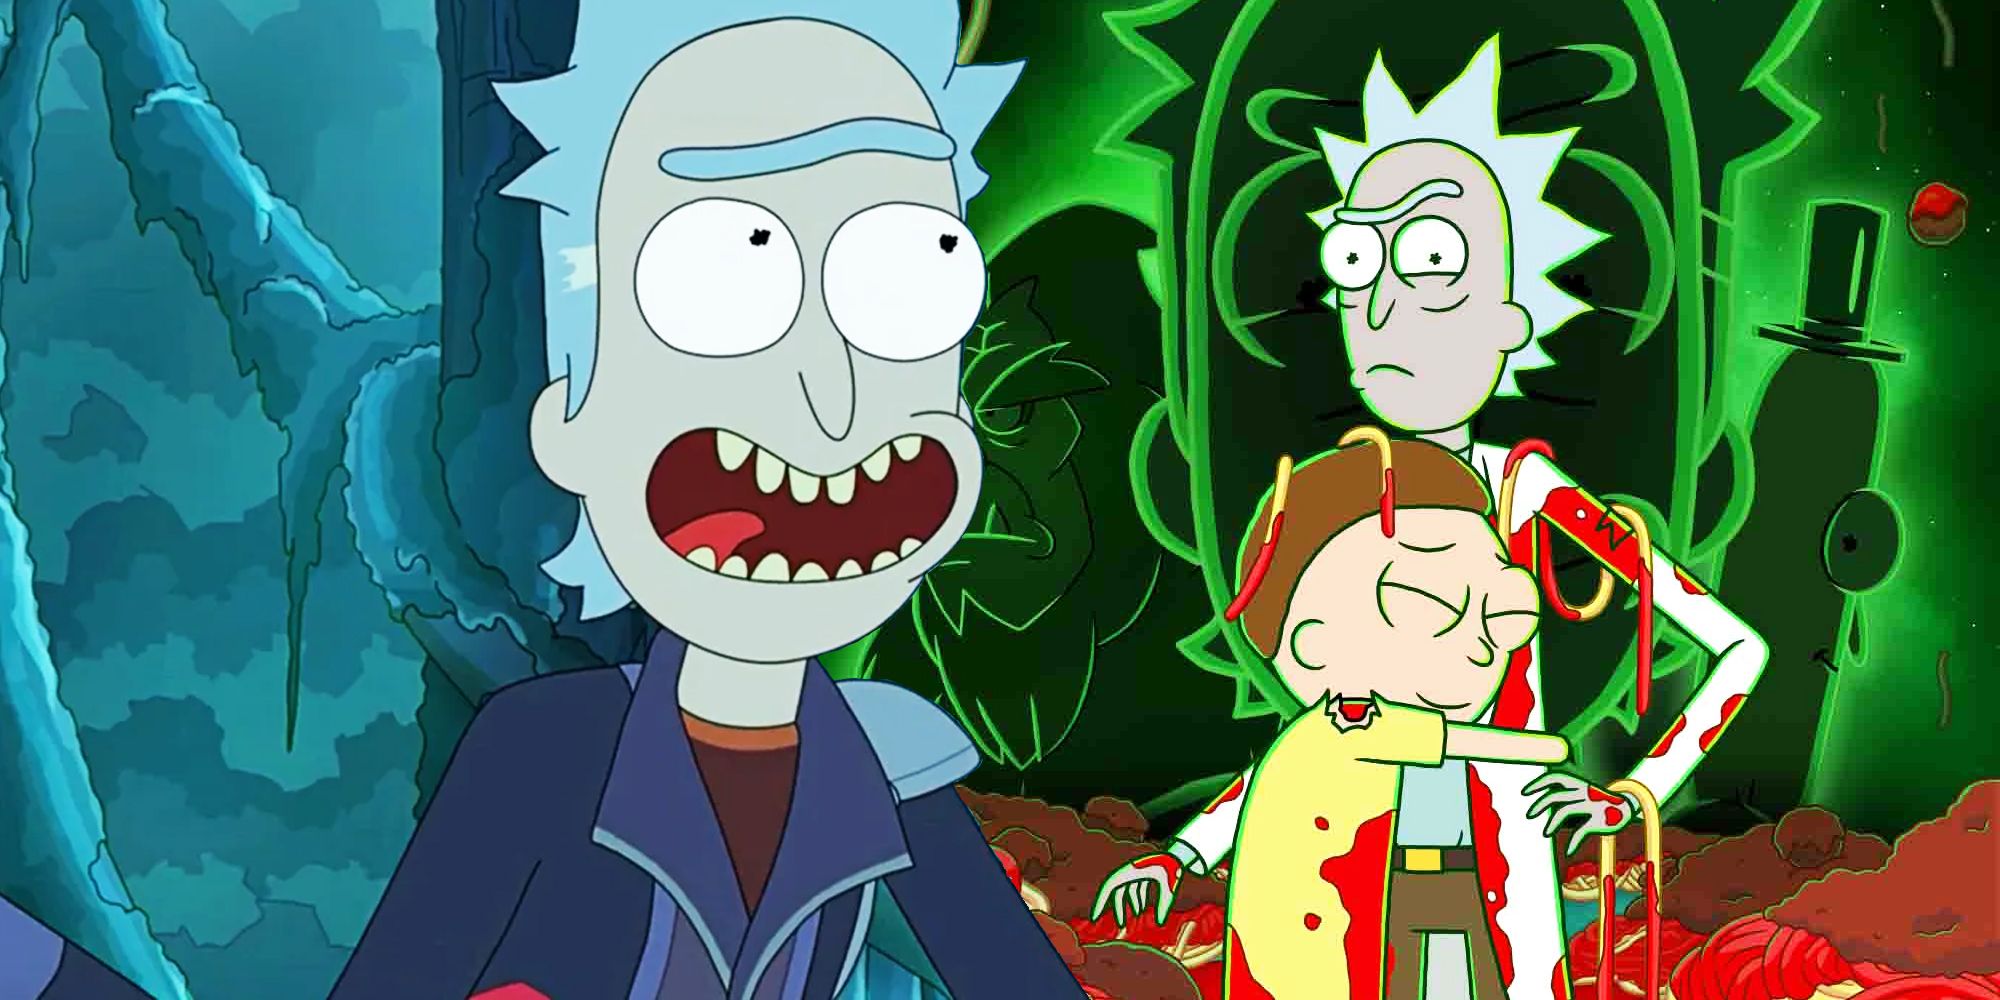 Rick And Morty Season 7 Is The Show’s Most Divisive Yet (& That’s A Good Thing)